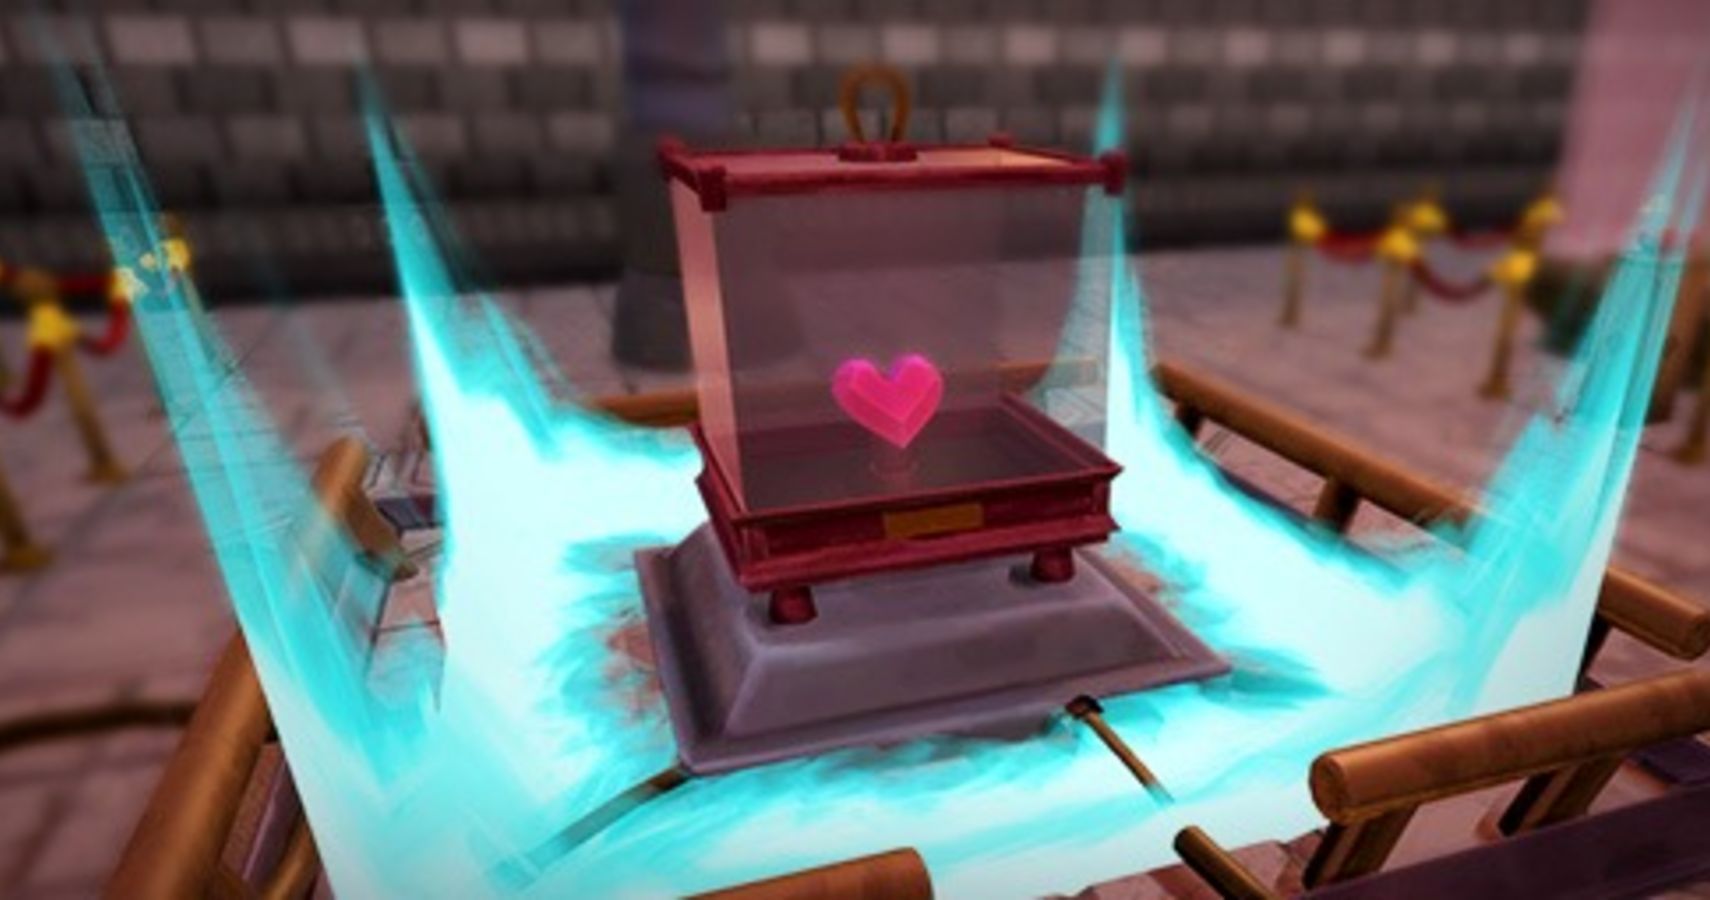 RuneScape Adds New Heartstealer Quest For Valentine's Day, Double XP